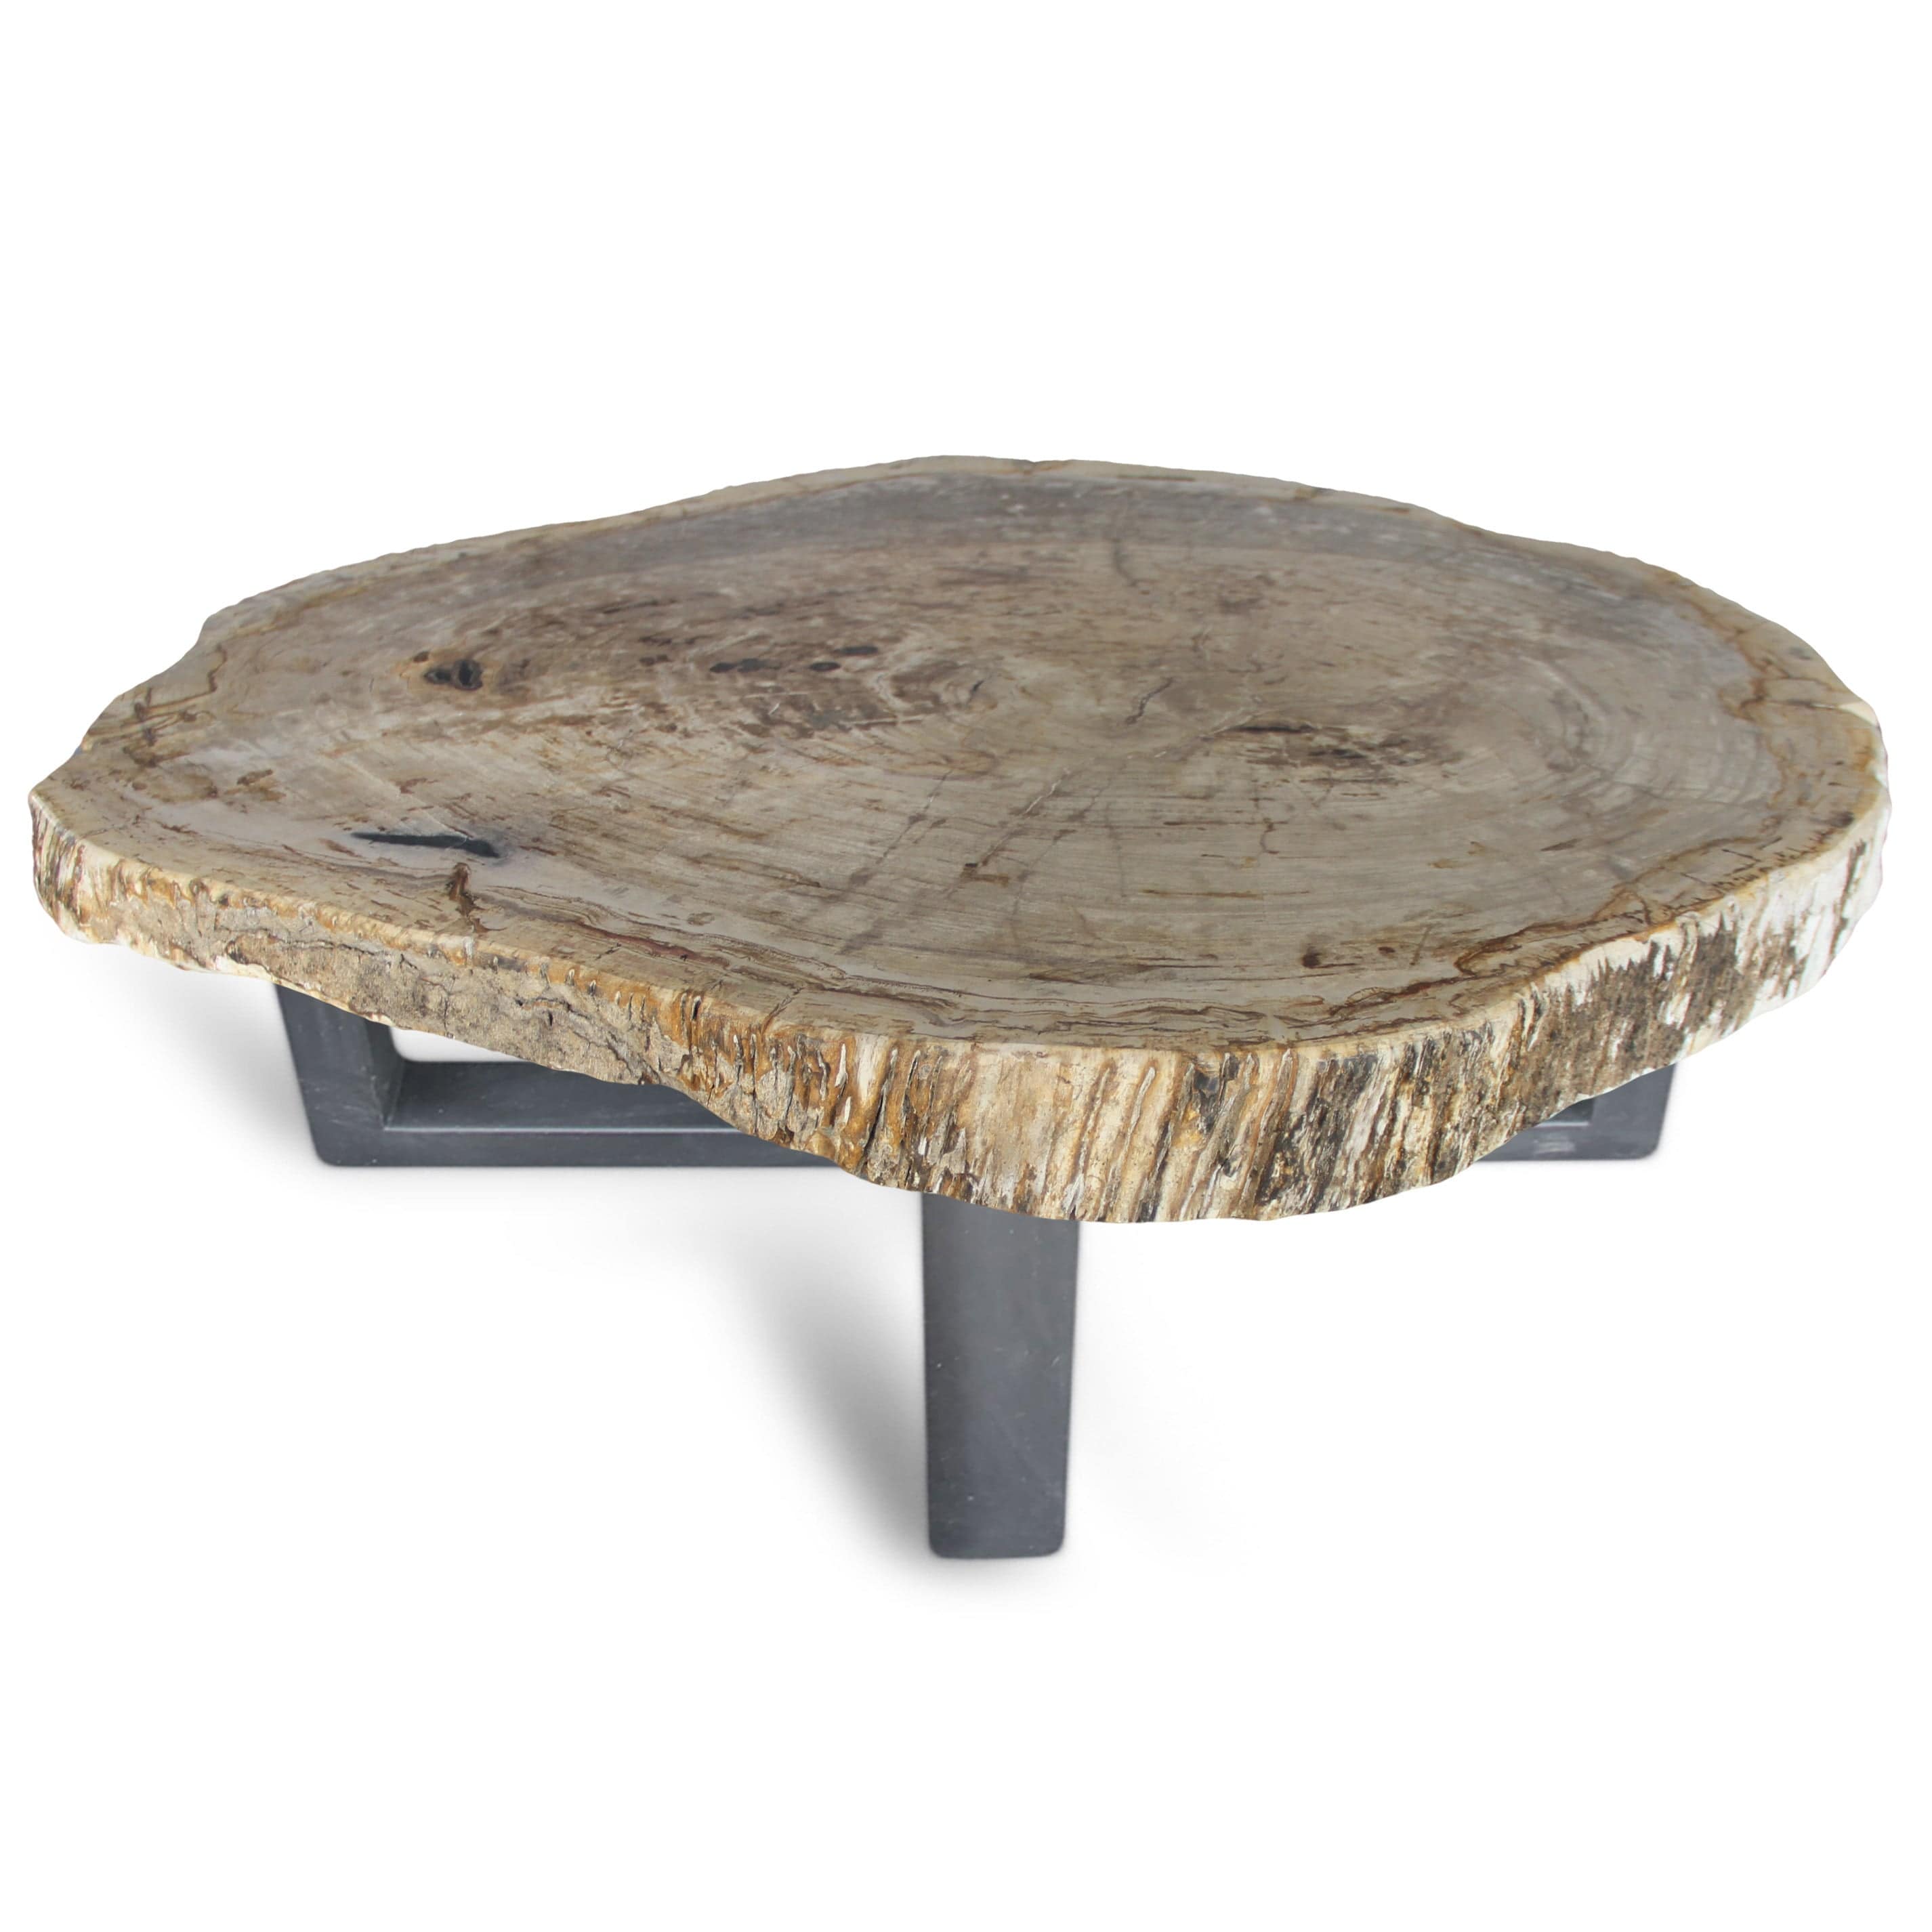 Kalifano Petrified Wood Petrified Wood Round Slab Coffee Table from Indonesia - 34" / 158 lbs PWT5800.001